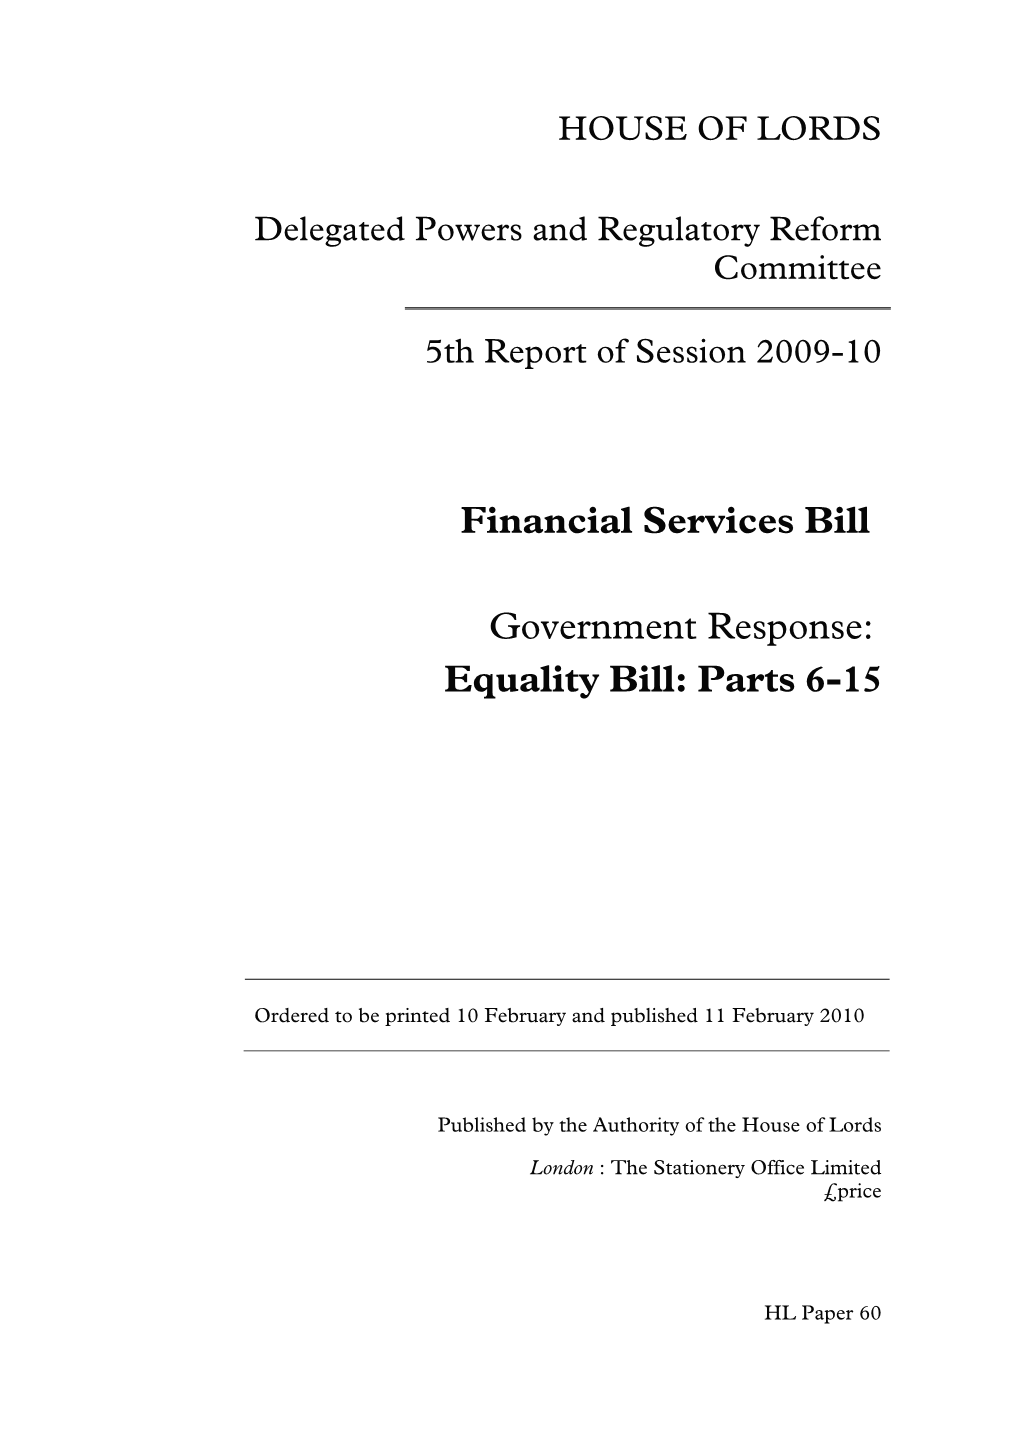 Financial Services Bill Government Response